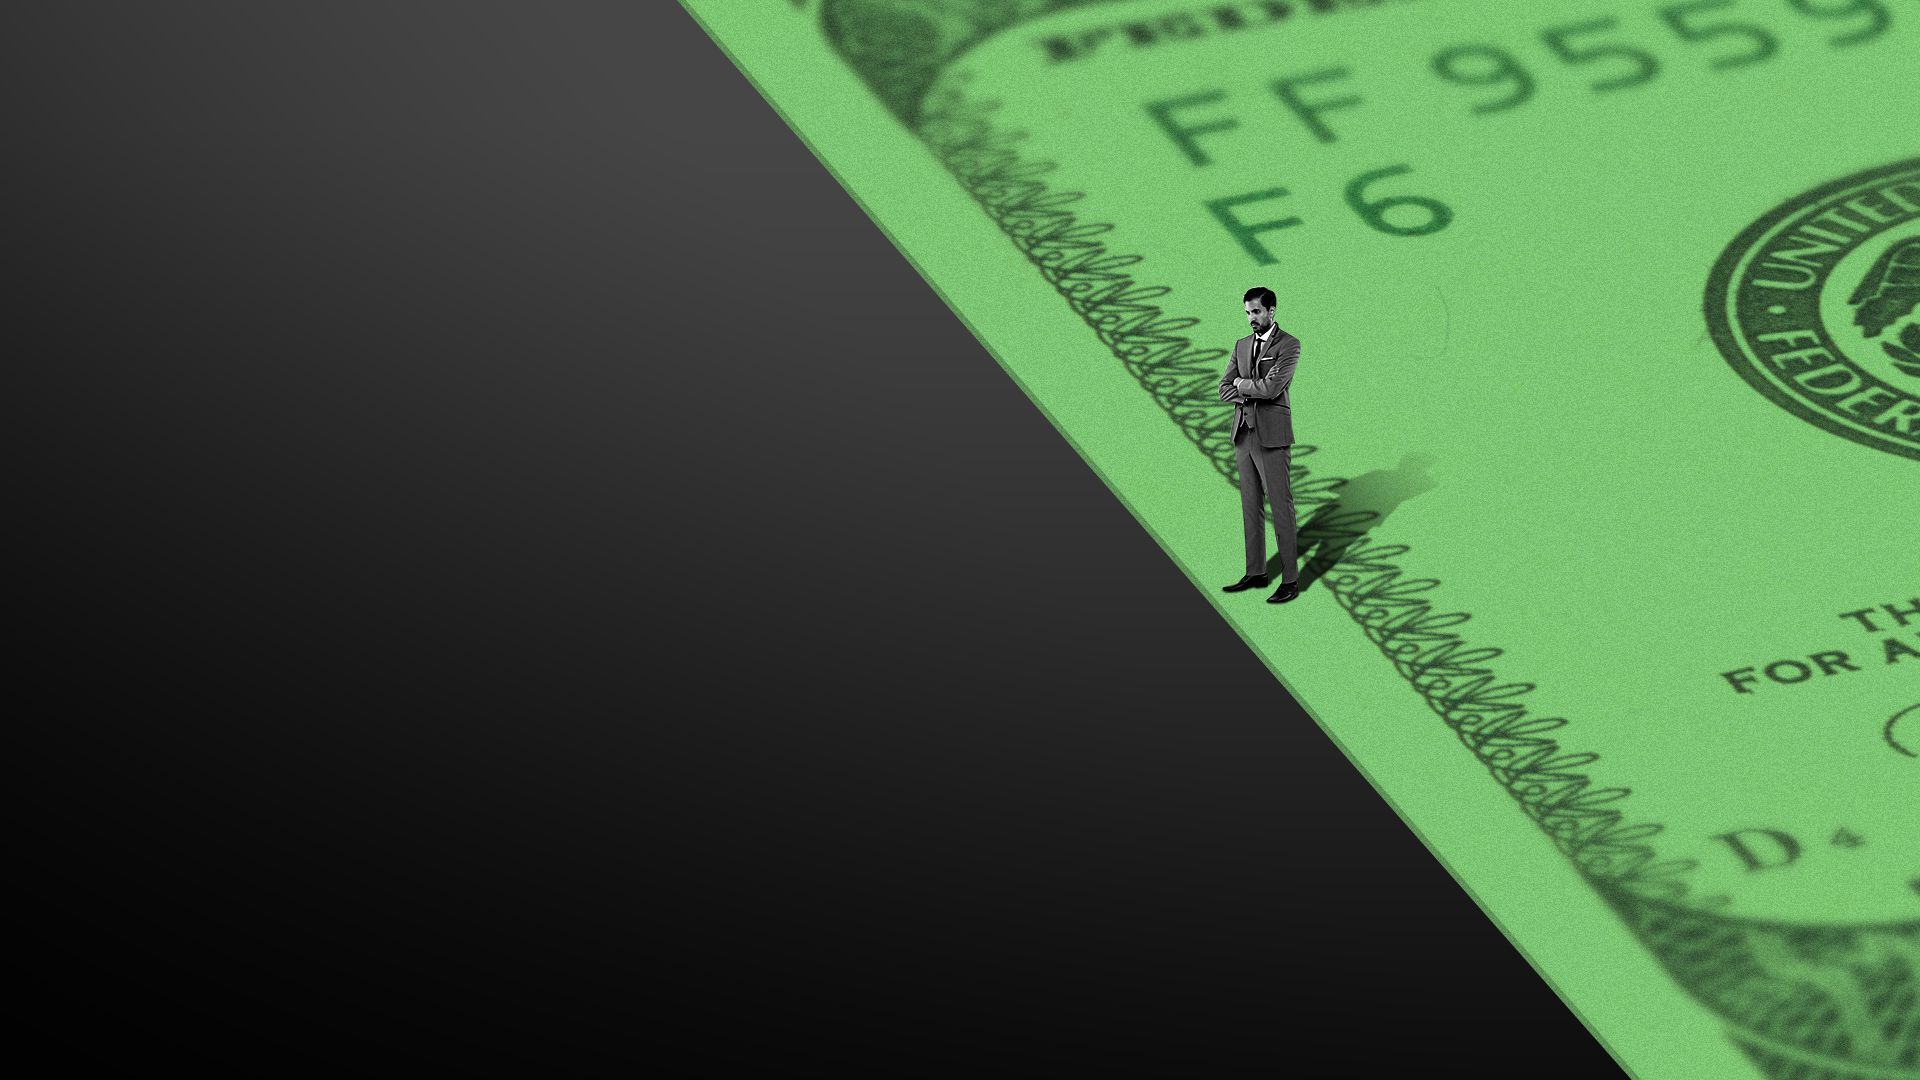 Illustration of a man standing on the edge of an extremely large hundred dollar bill staring over the edge into a dark void. 